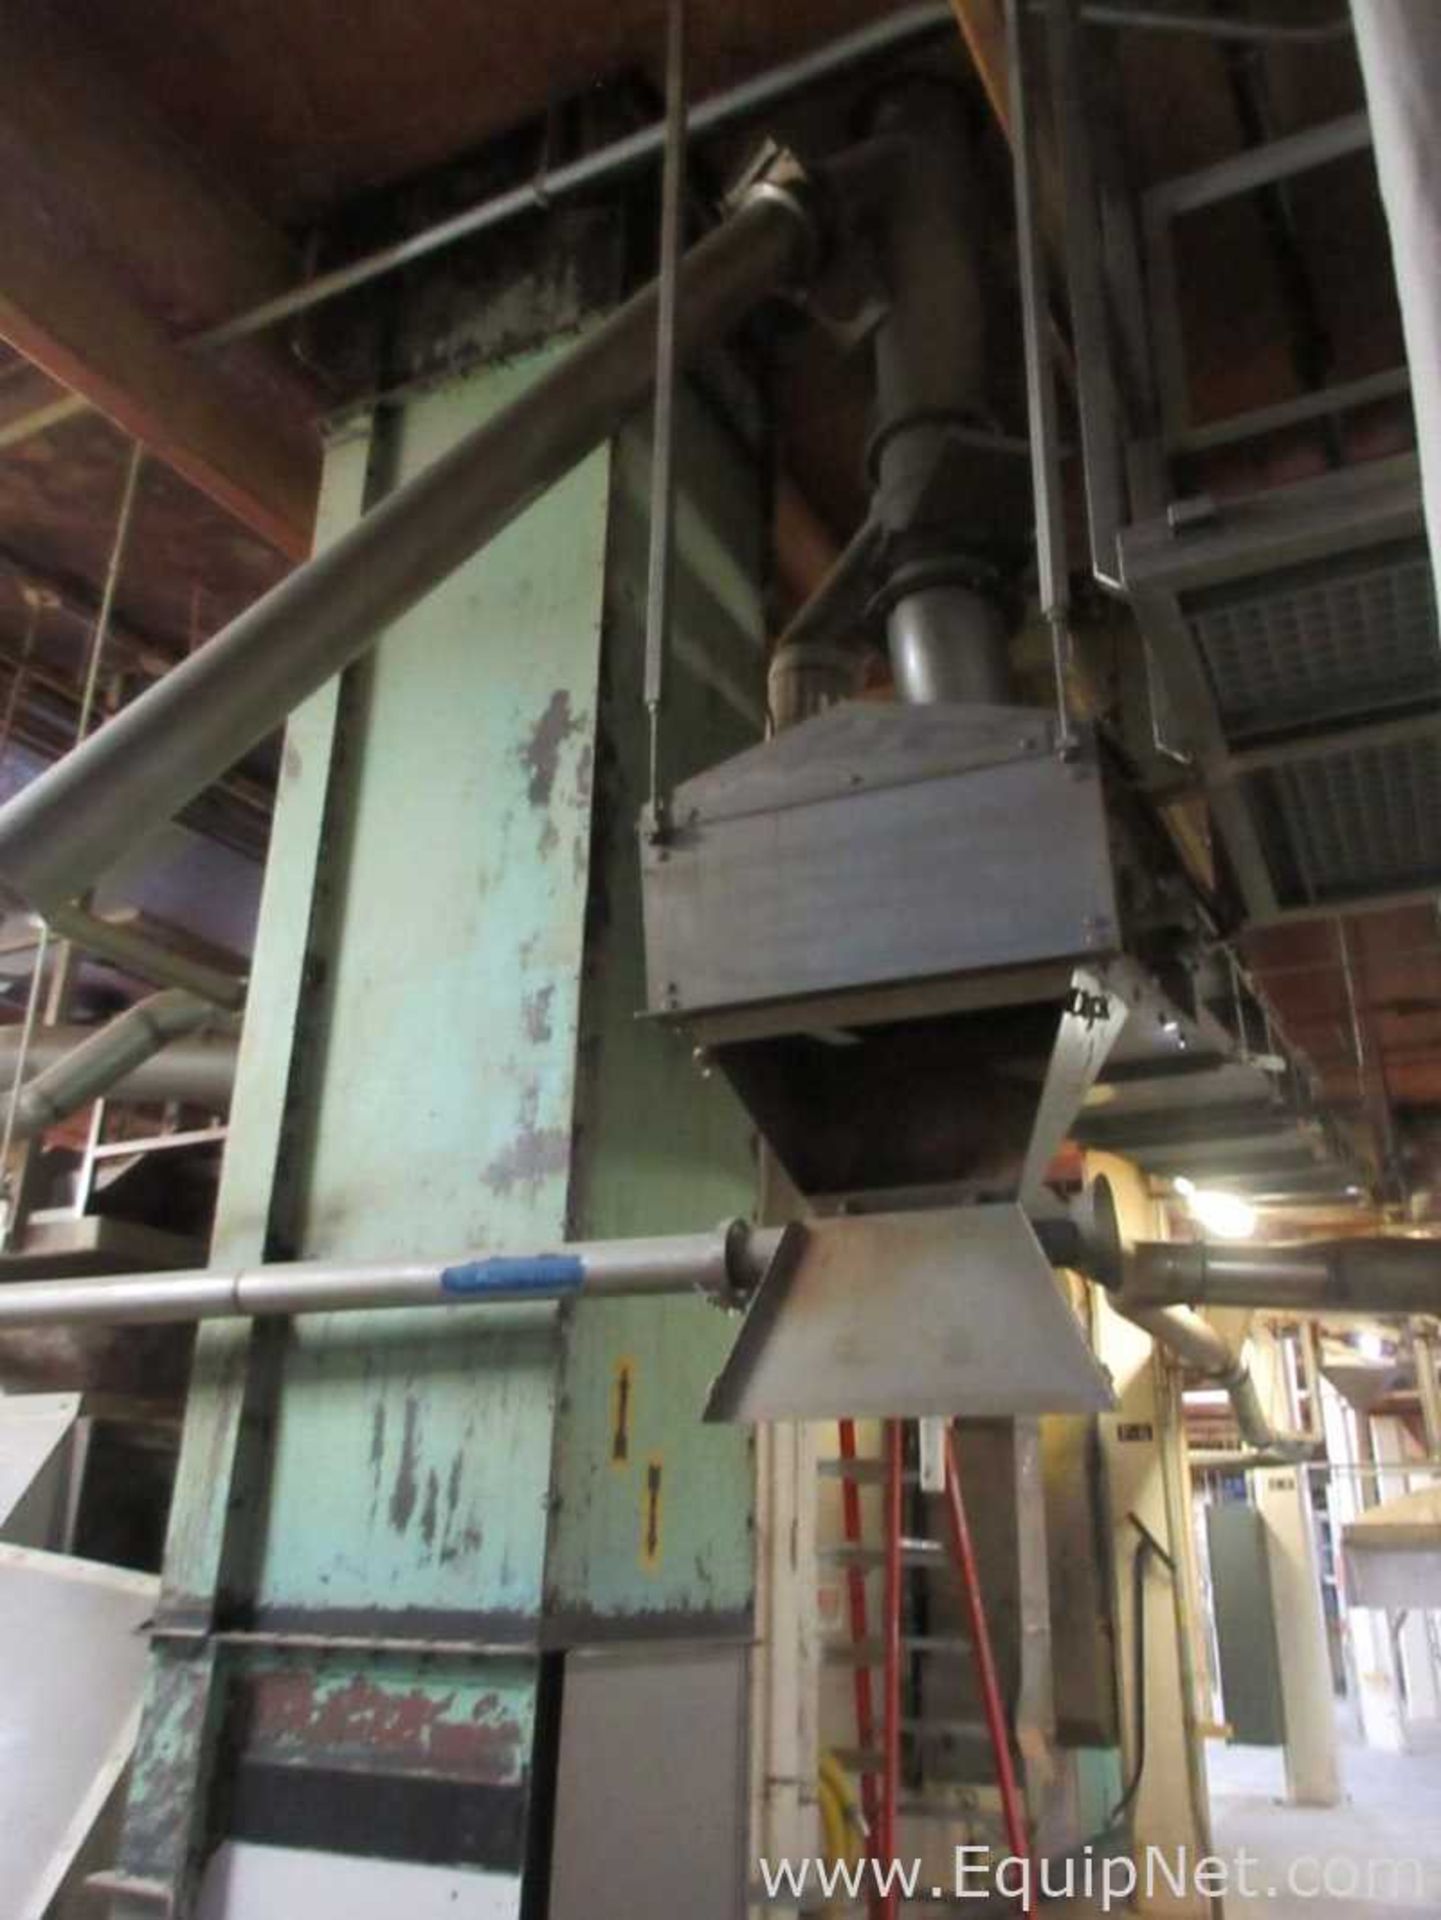 EQUIPNET LISTING #597061; REMOVAL COST: $0; DESCRIPTION: National Drying Machinery Belt - Image 8 of 27